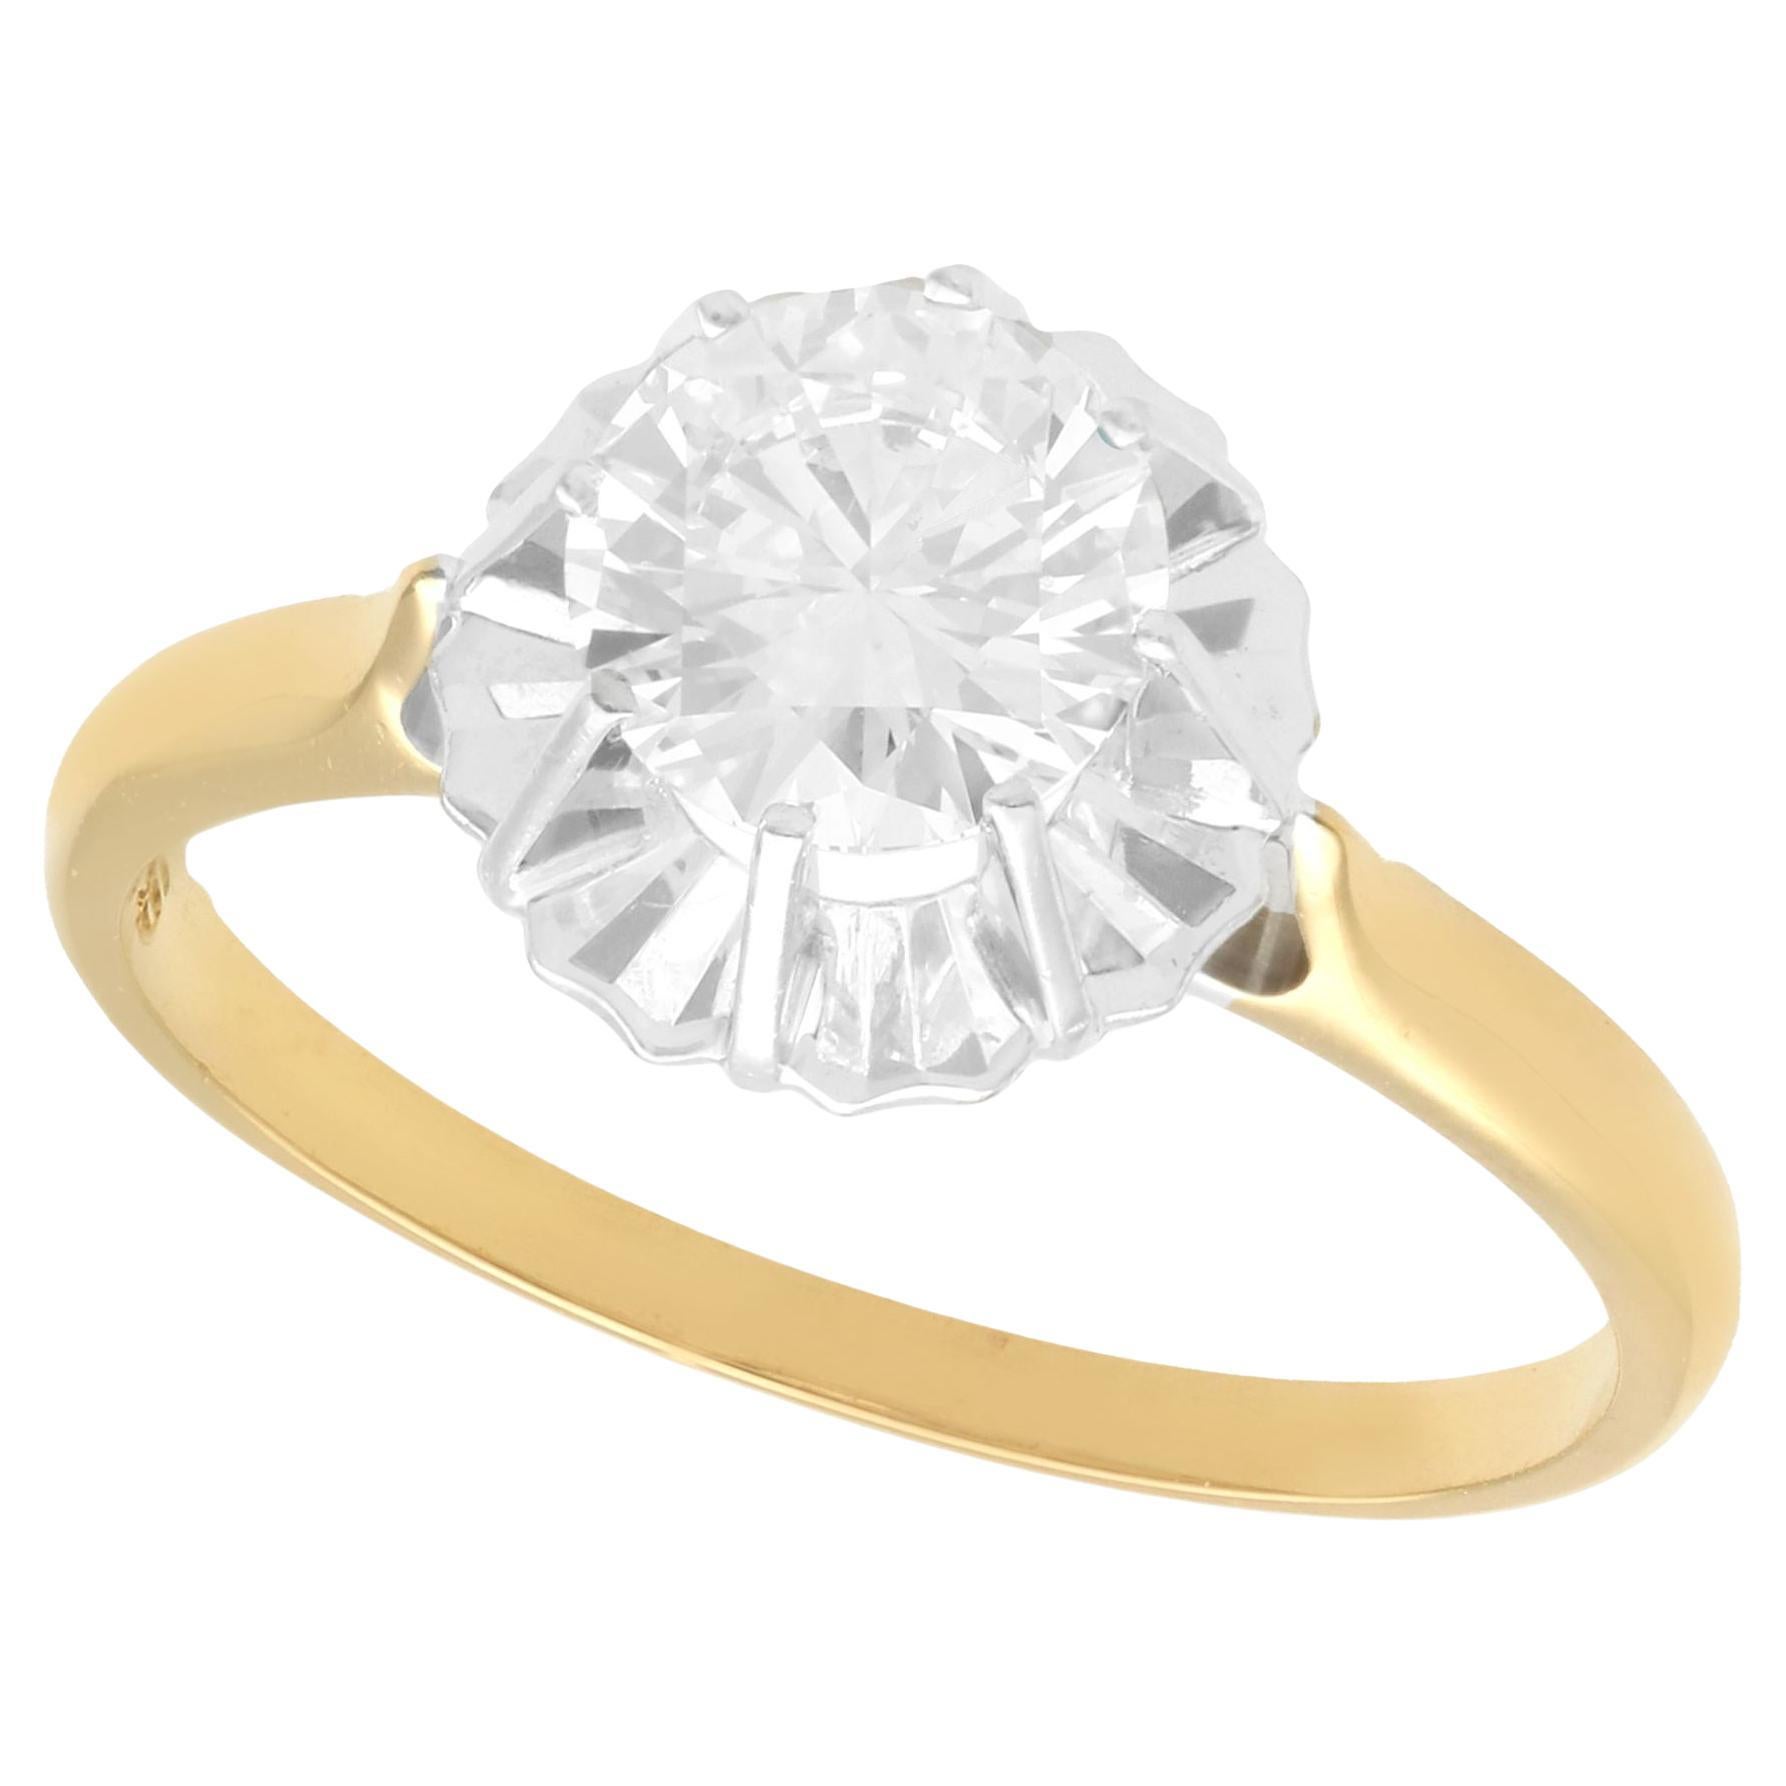 Antique 1.18 Carat Diamond and Yellow Gold Solitaire Ring, circa 1930 For Sale